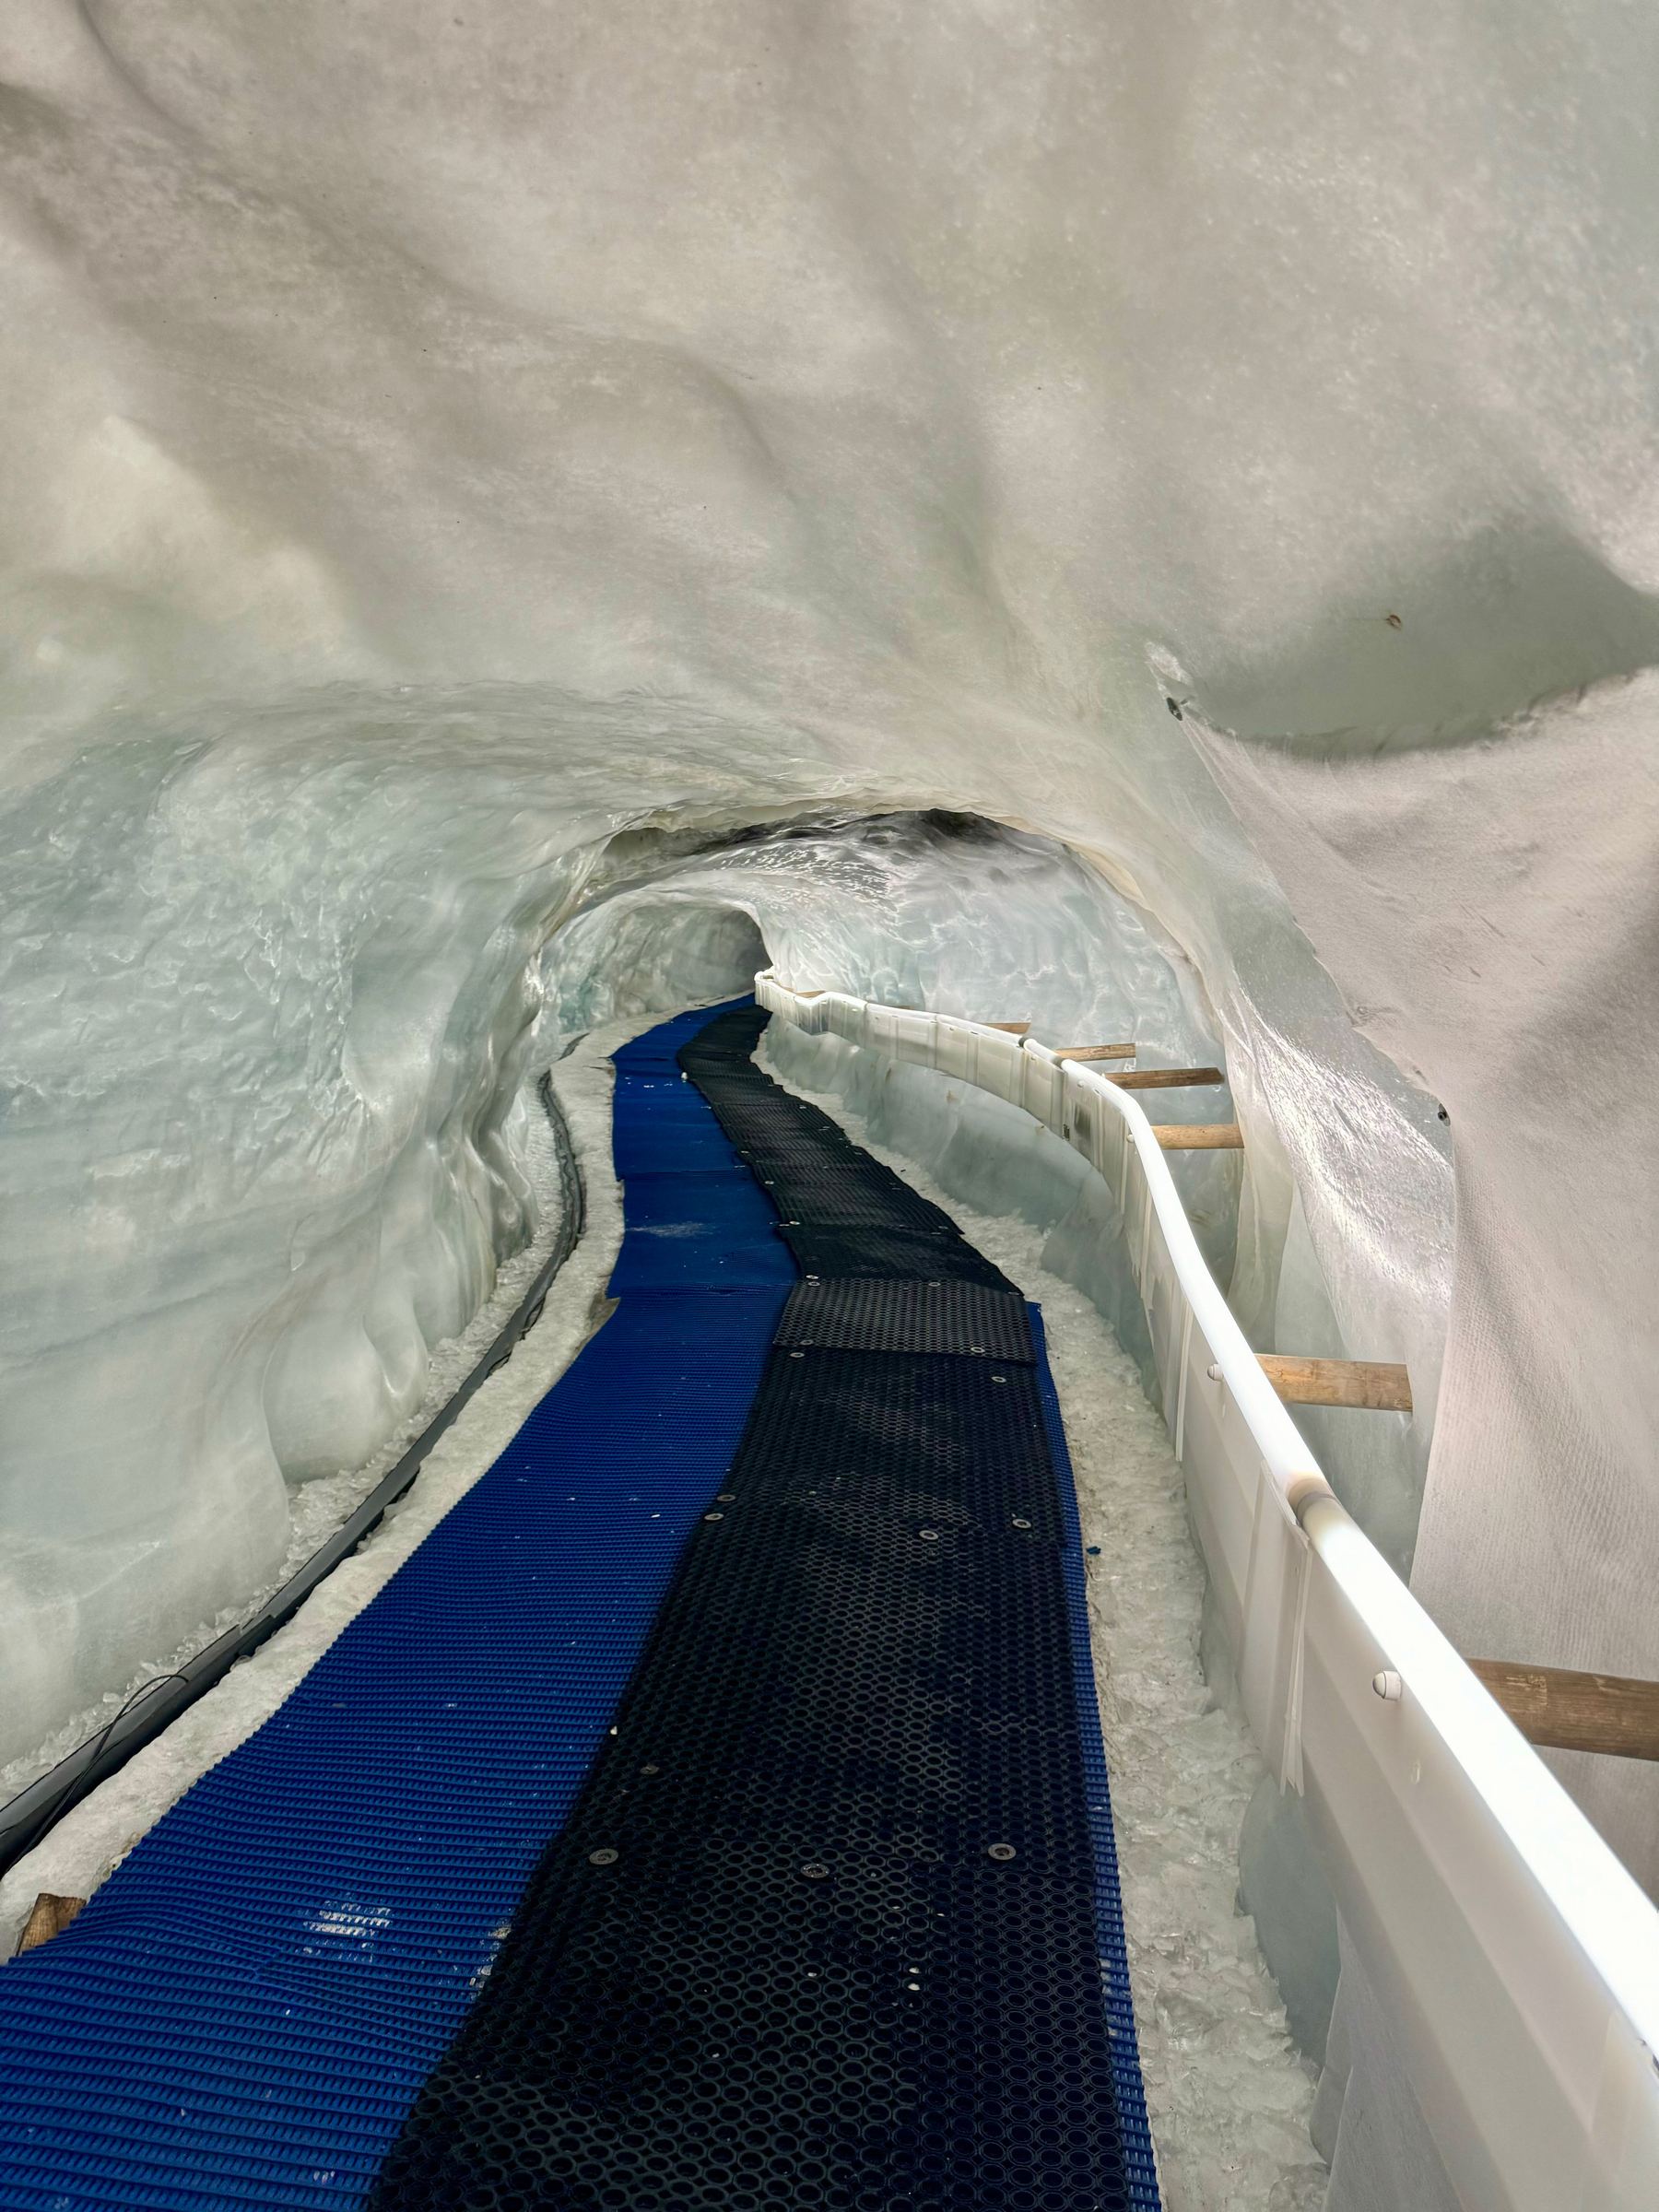 A walkway through an ice tunnel with blue flooring, handrails on the sides, and walls and ceiling of curved, smooth ice.